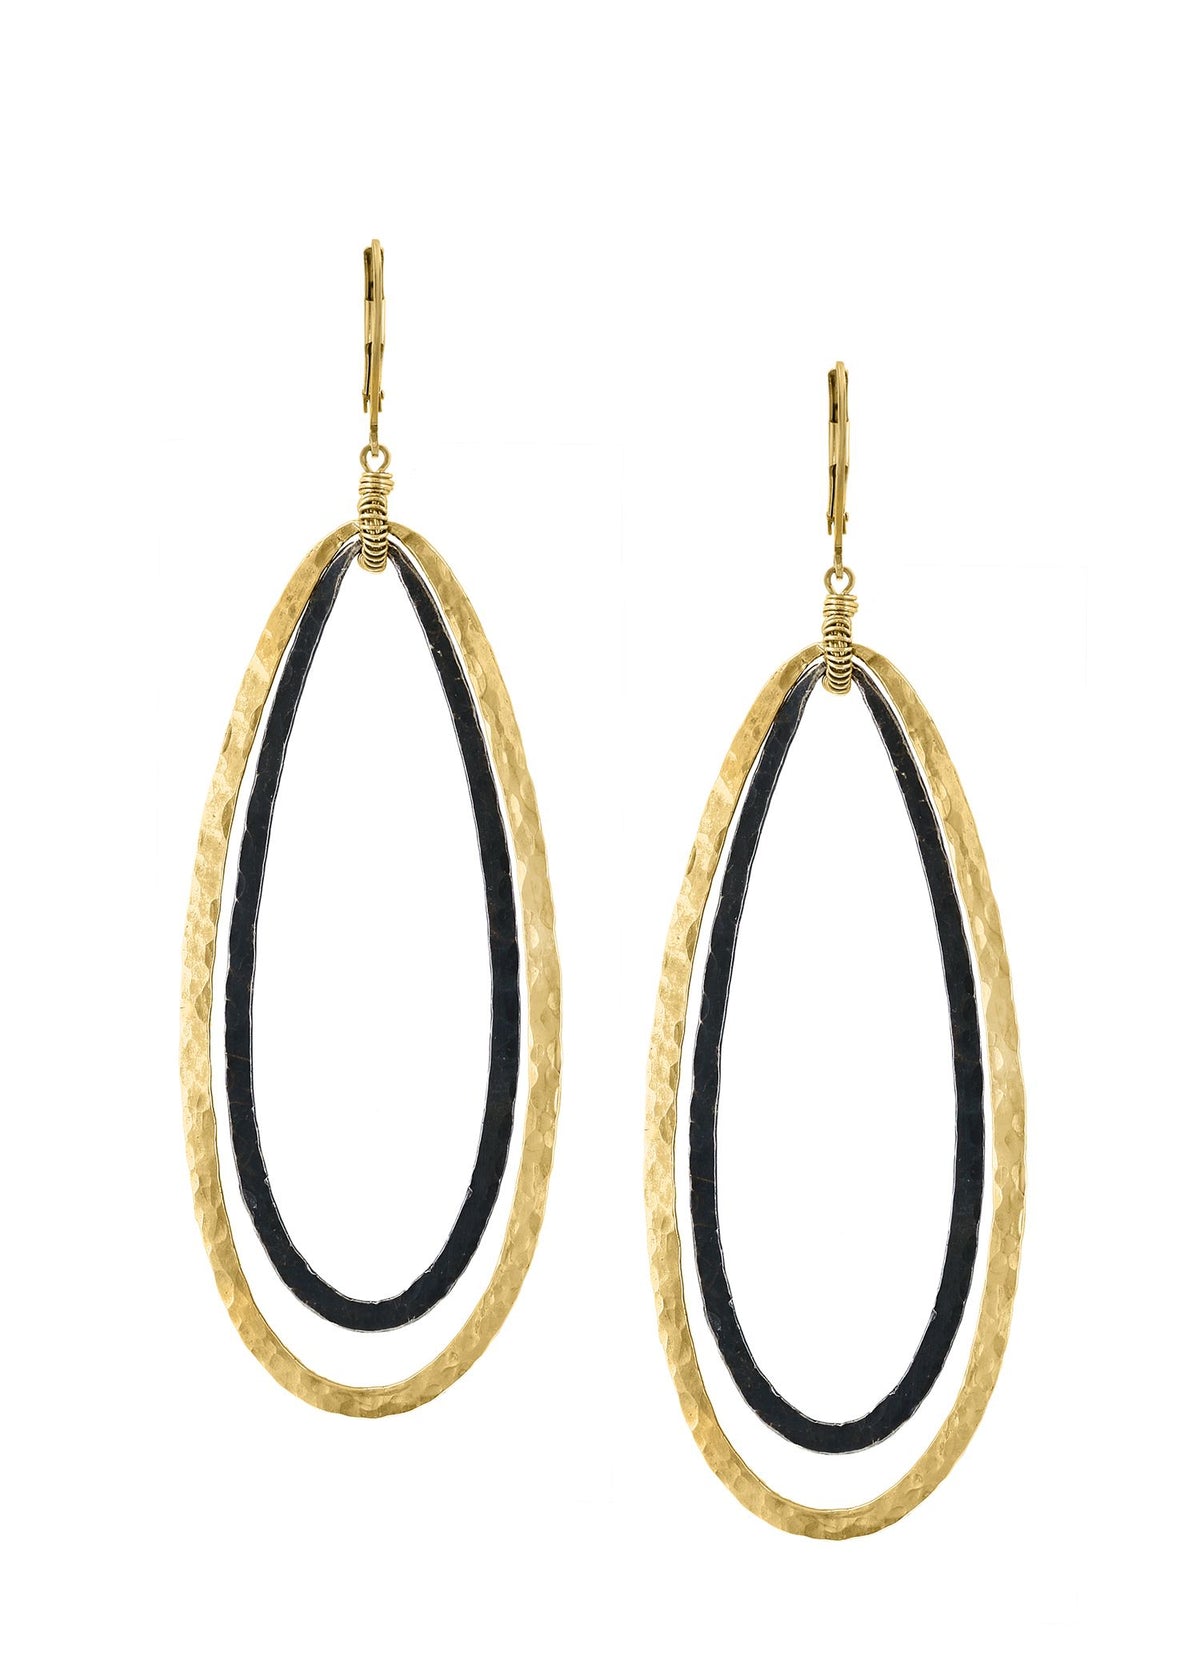 14k gold fill Blackened sterling silver Mixed metal Earrings measure 2-13/16&quot; in length (including the levers) and 7/8&quot; in width Handmade in our Los Angeles studio